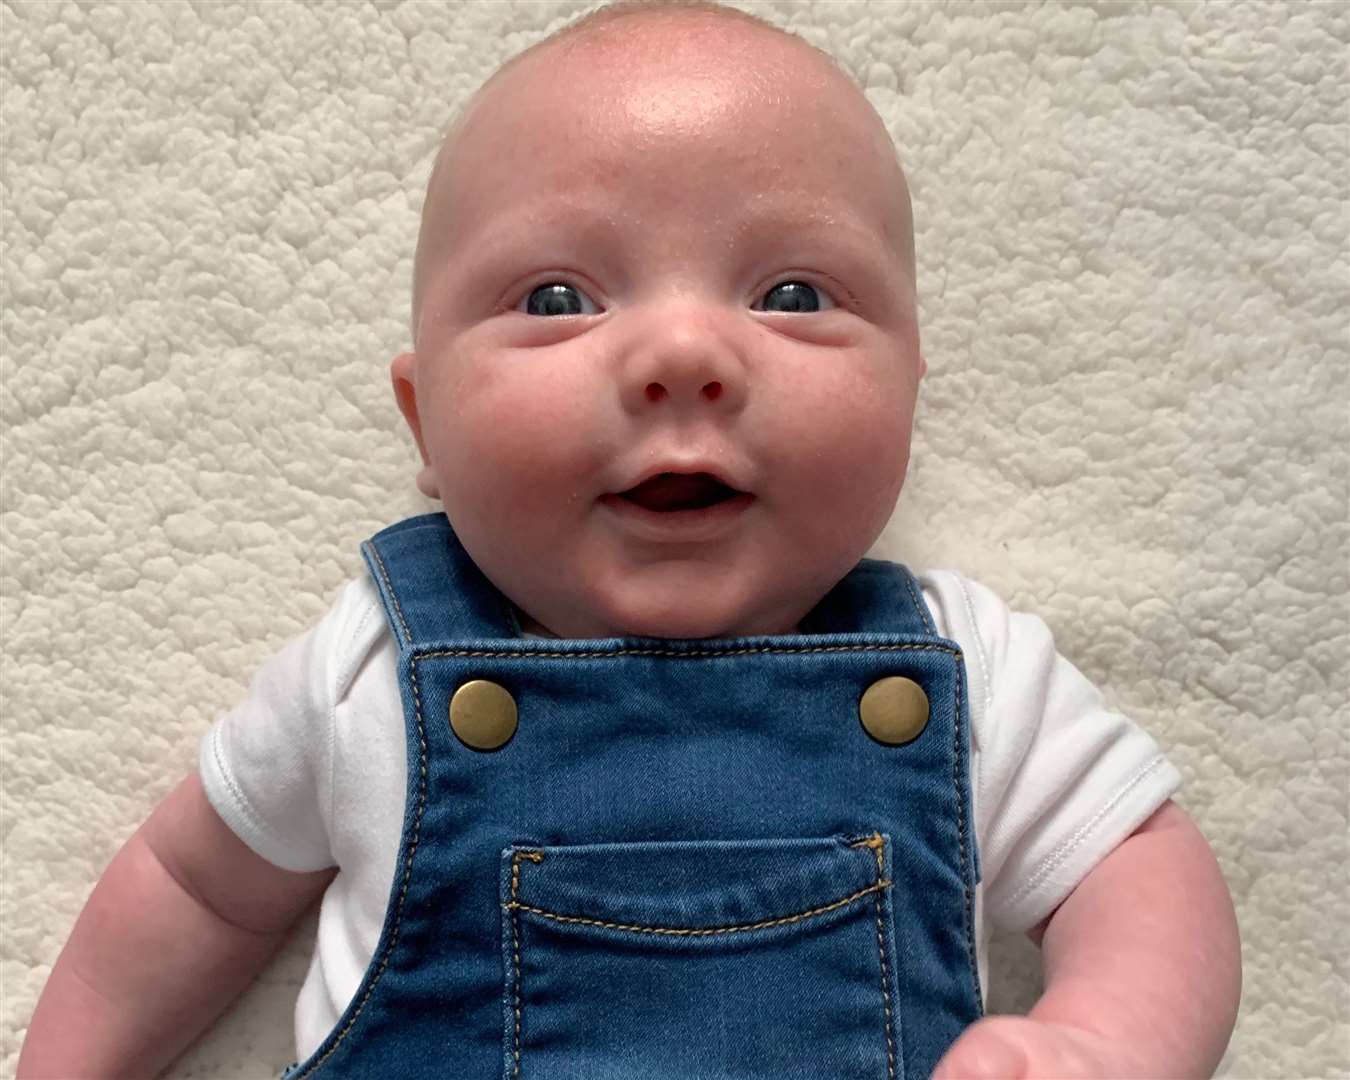 James and Louise GIbson's son William is six weeks old